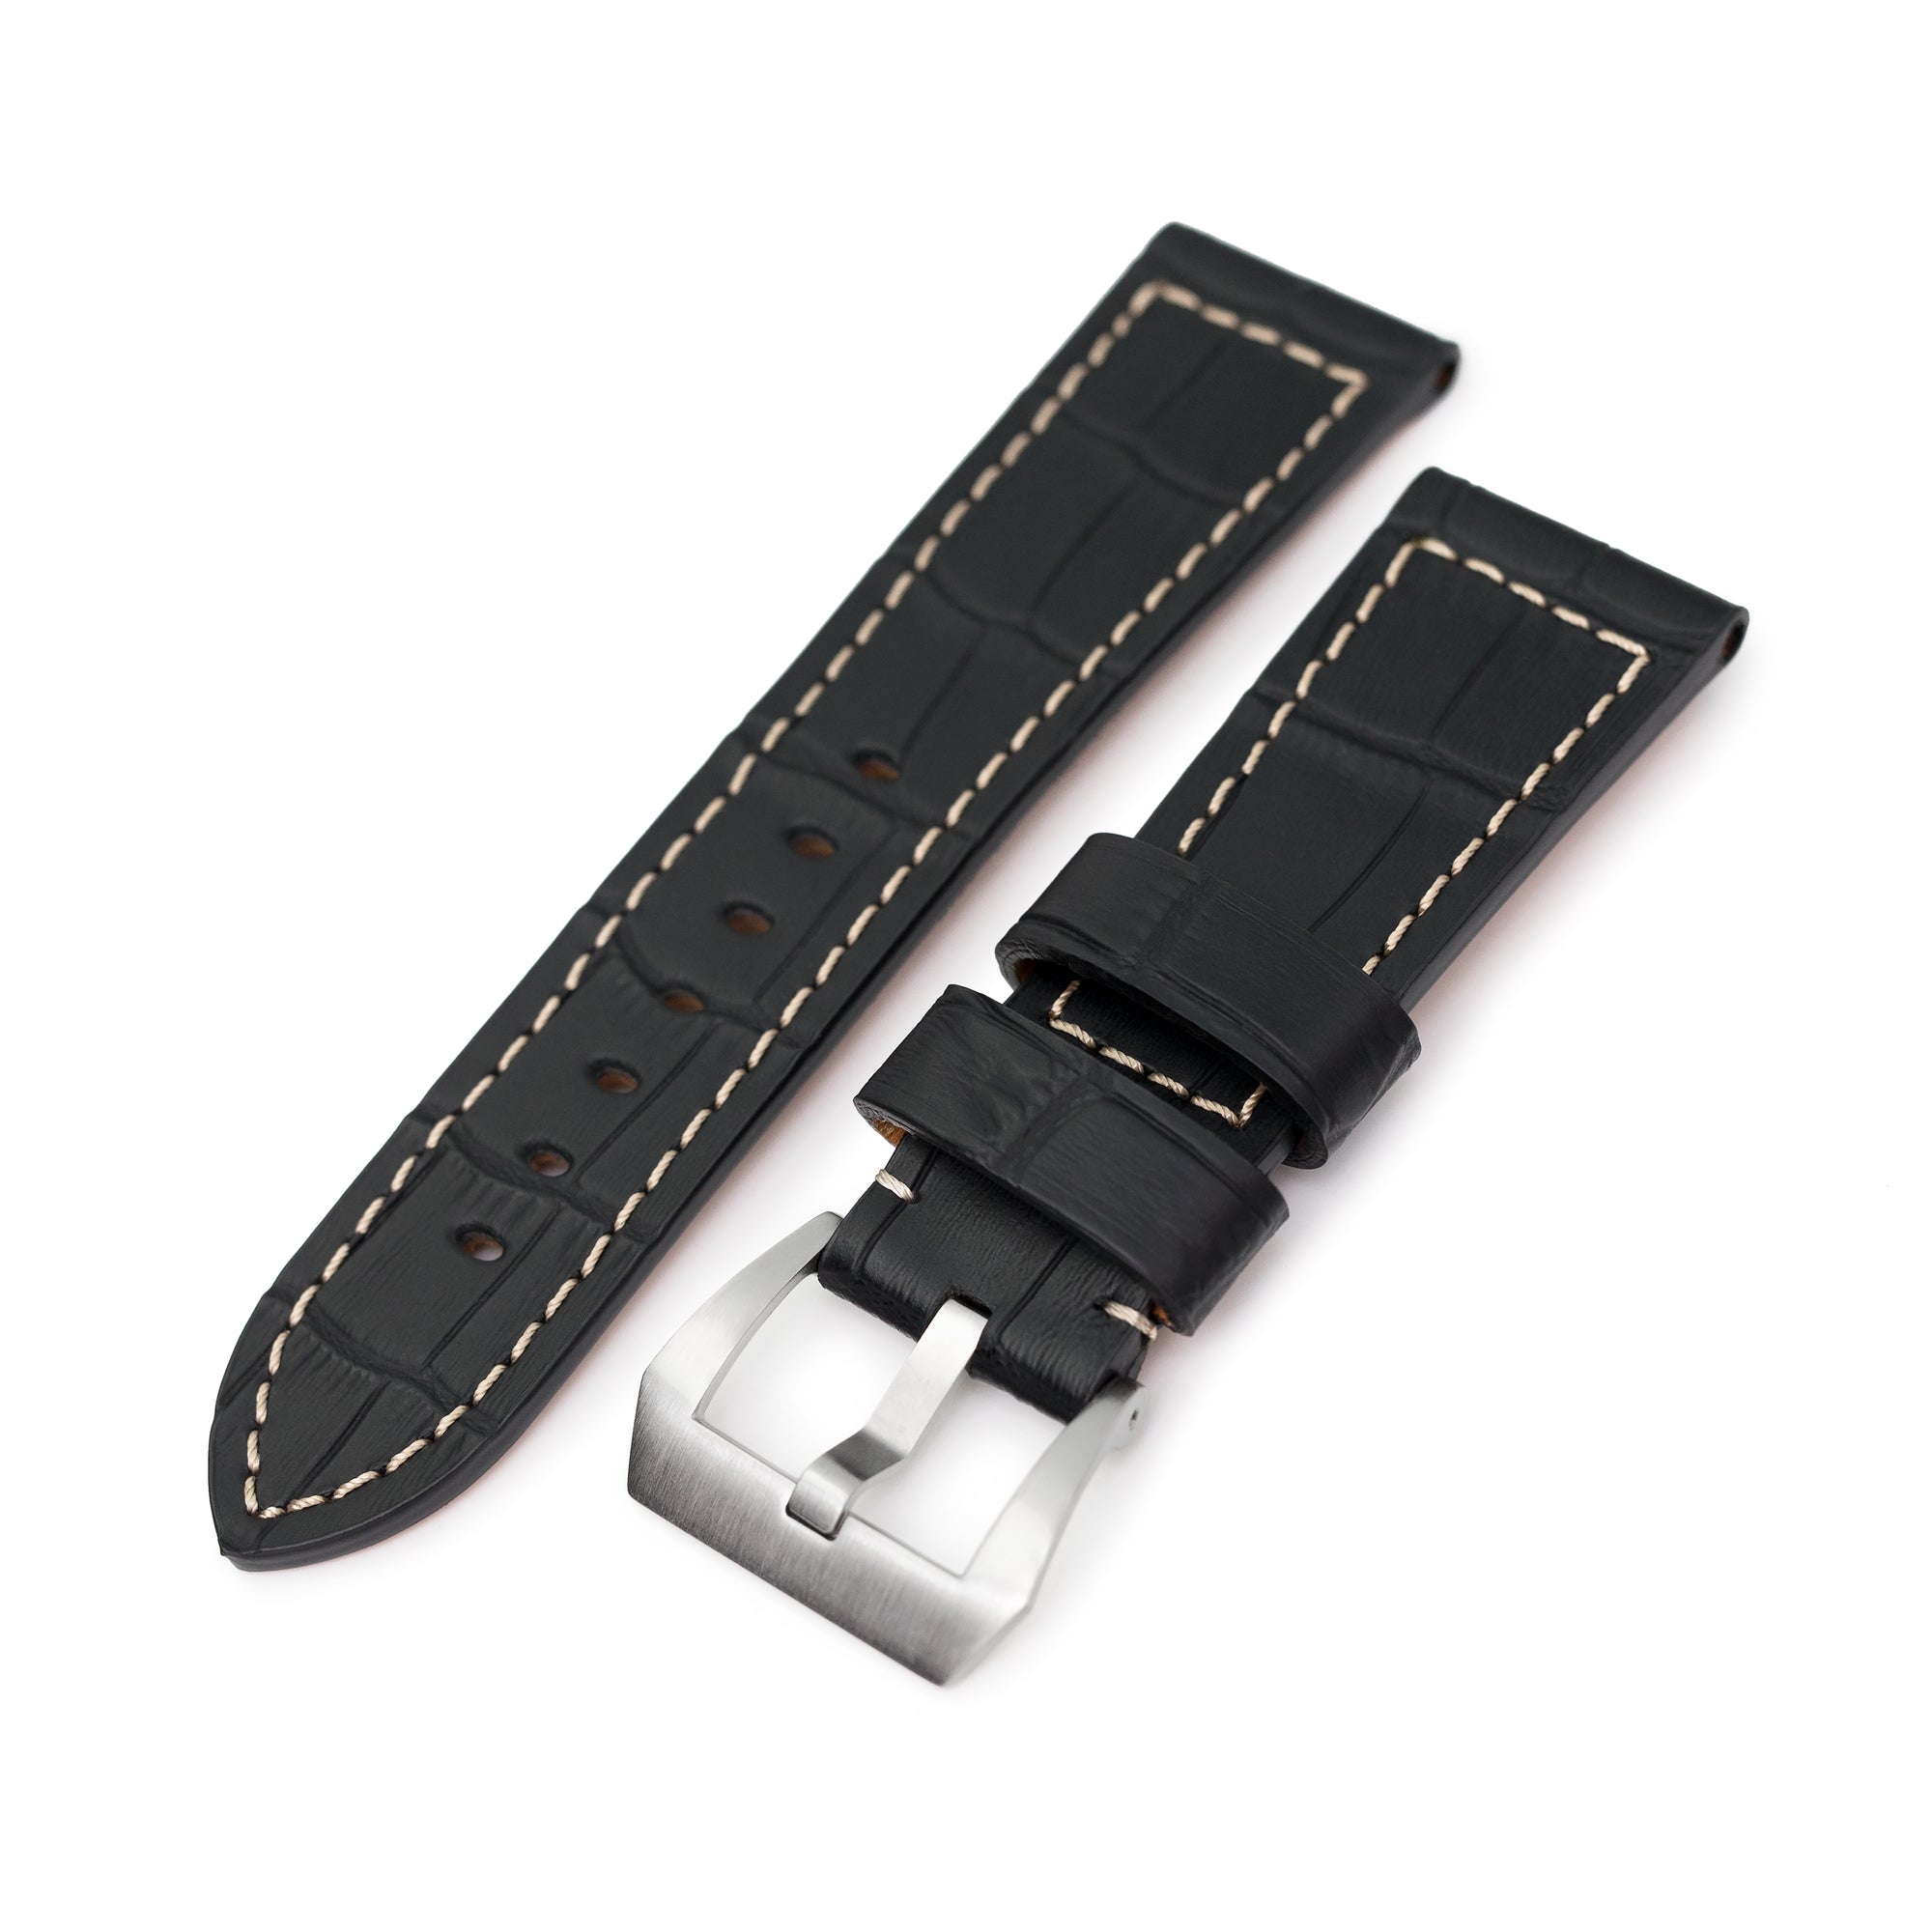 Pam Collection, Black Croco Grain Italian Leather Watch Strap for Panerai, Beige Stitching Strapcode watch bands